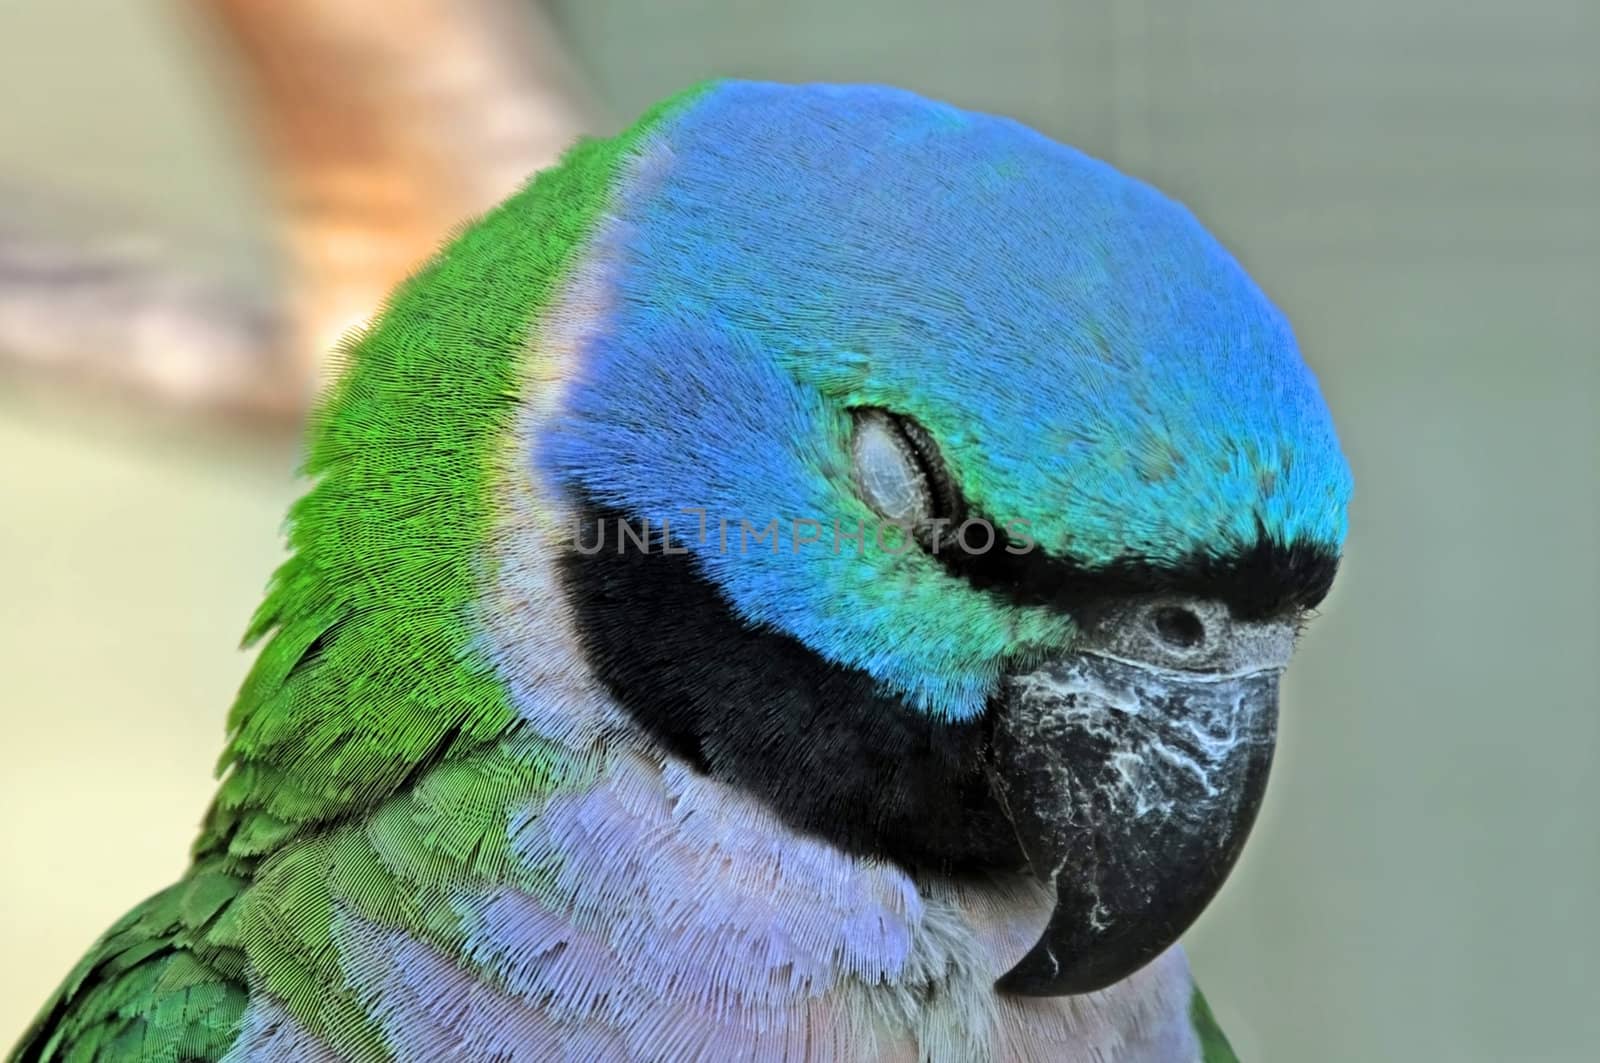 This image shows a portrait from a sleeping parrot